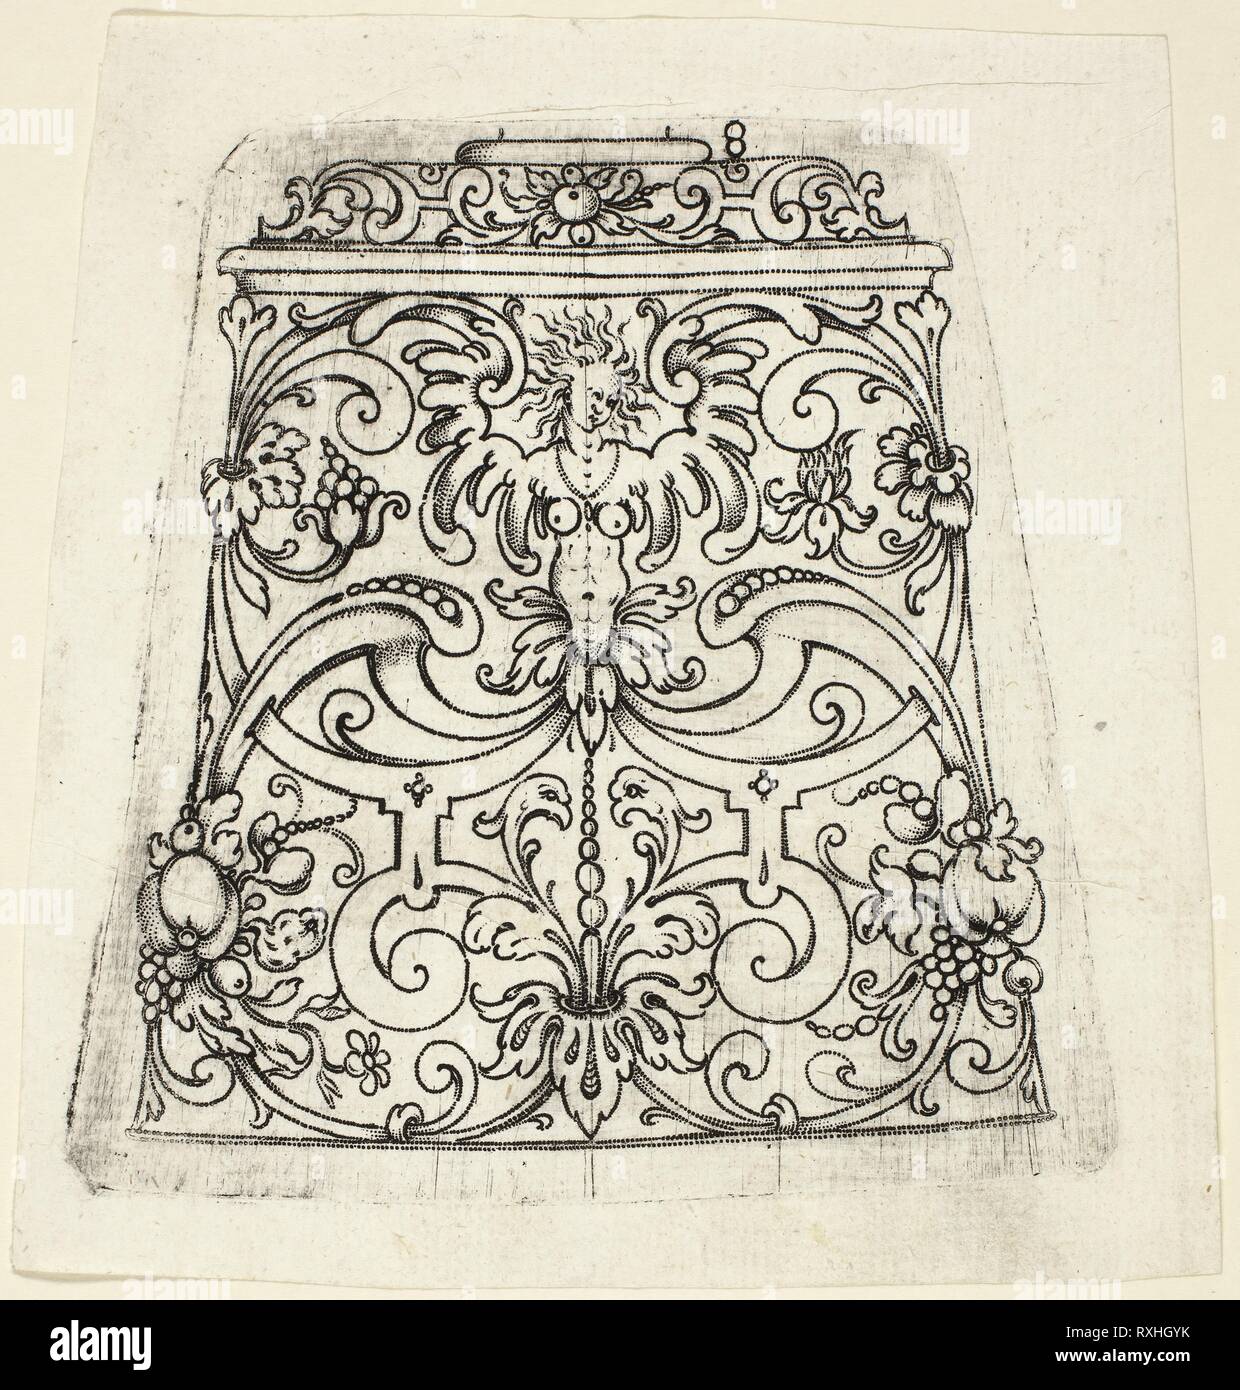 Plate 8, from twenty ornamental designs for goblets and beakers. Master A.P.; German, active early 17th century. Date: 1604. Dimensions: 115 x 105 mm (image); 122 x 120 mm (plate); 142 x 137 mm (sheet). Punch engraving in black on ivory laid paper. Origin: Germany. Museum: The Chicago Art Institute. Stock Photo